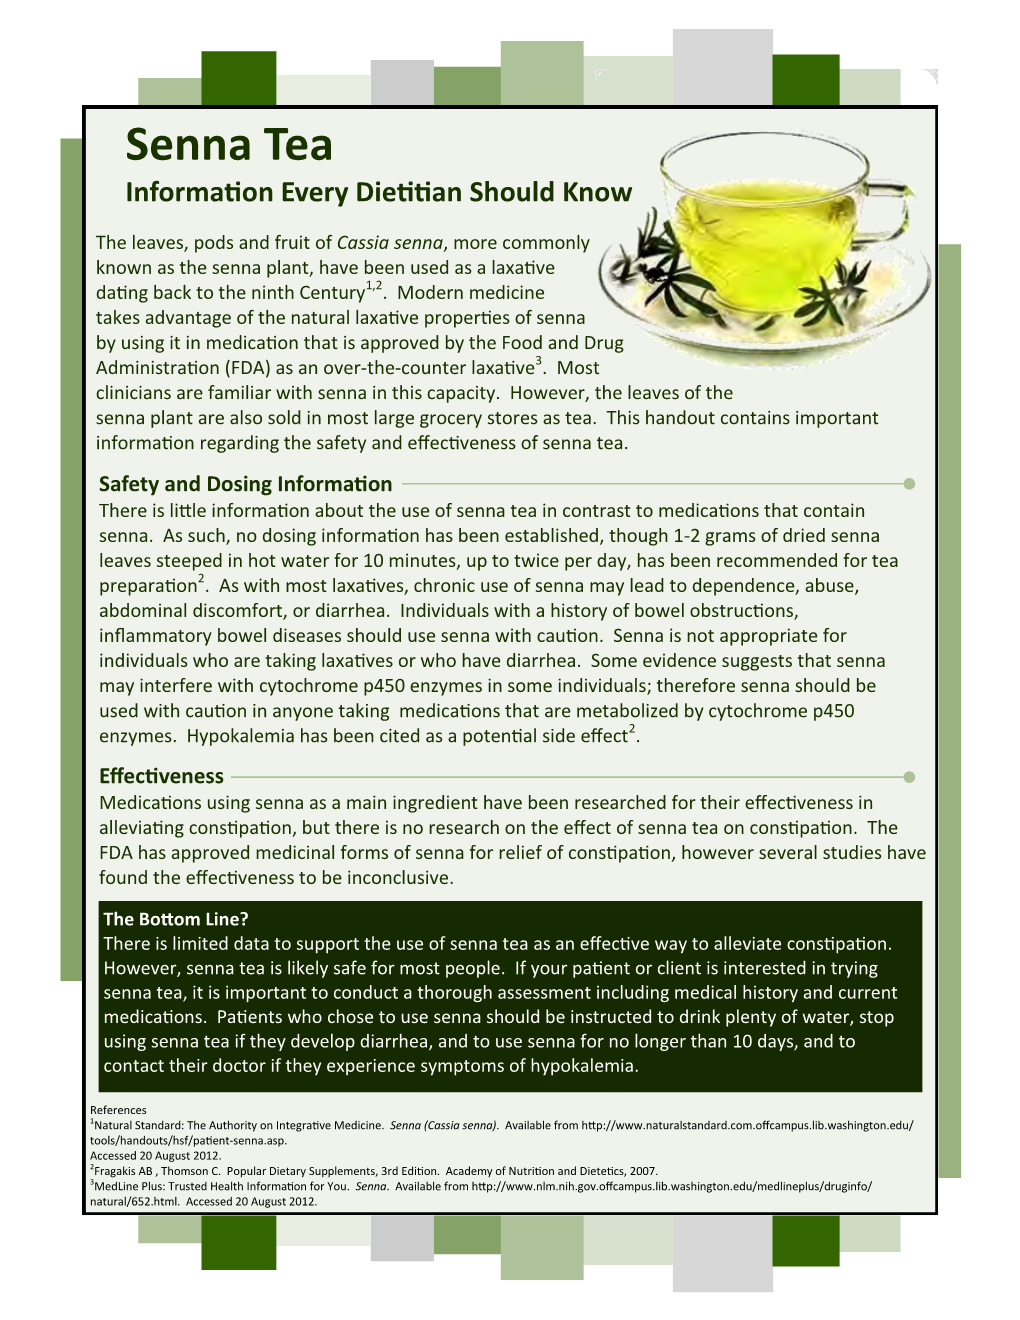 Senna Tea Information Every Dietitian Should Know